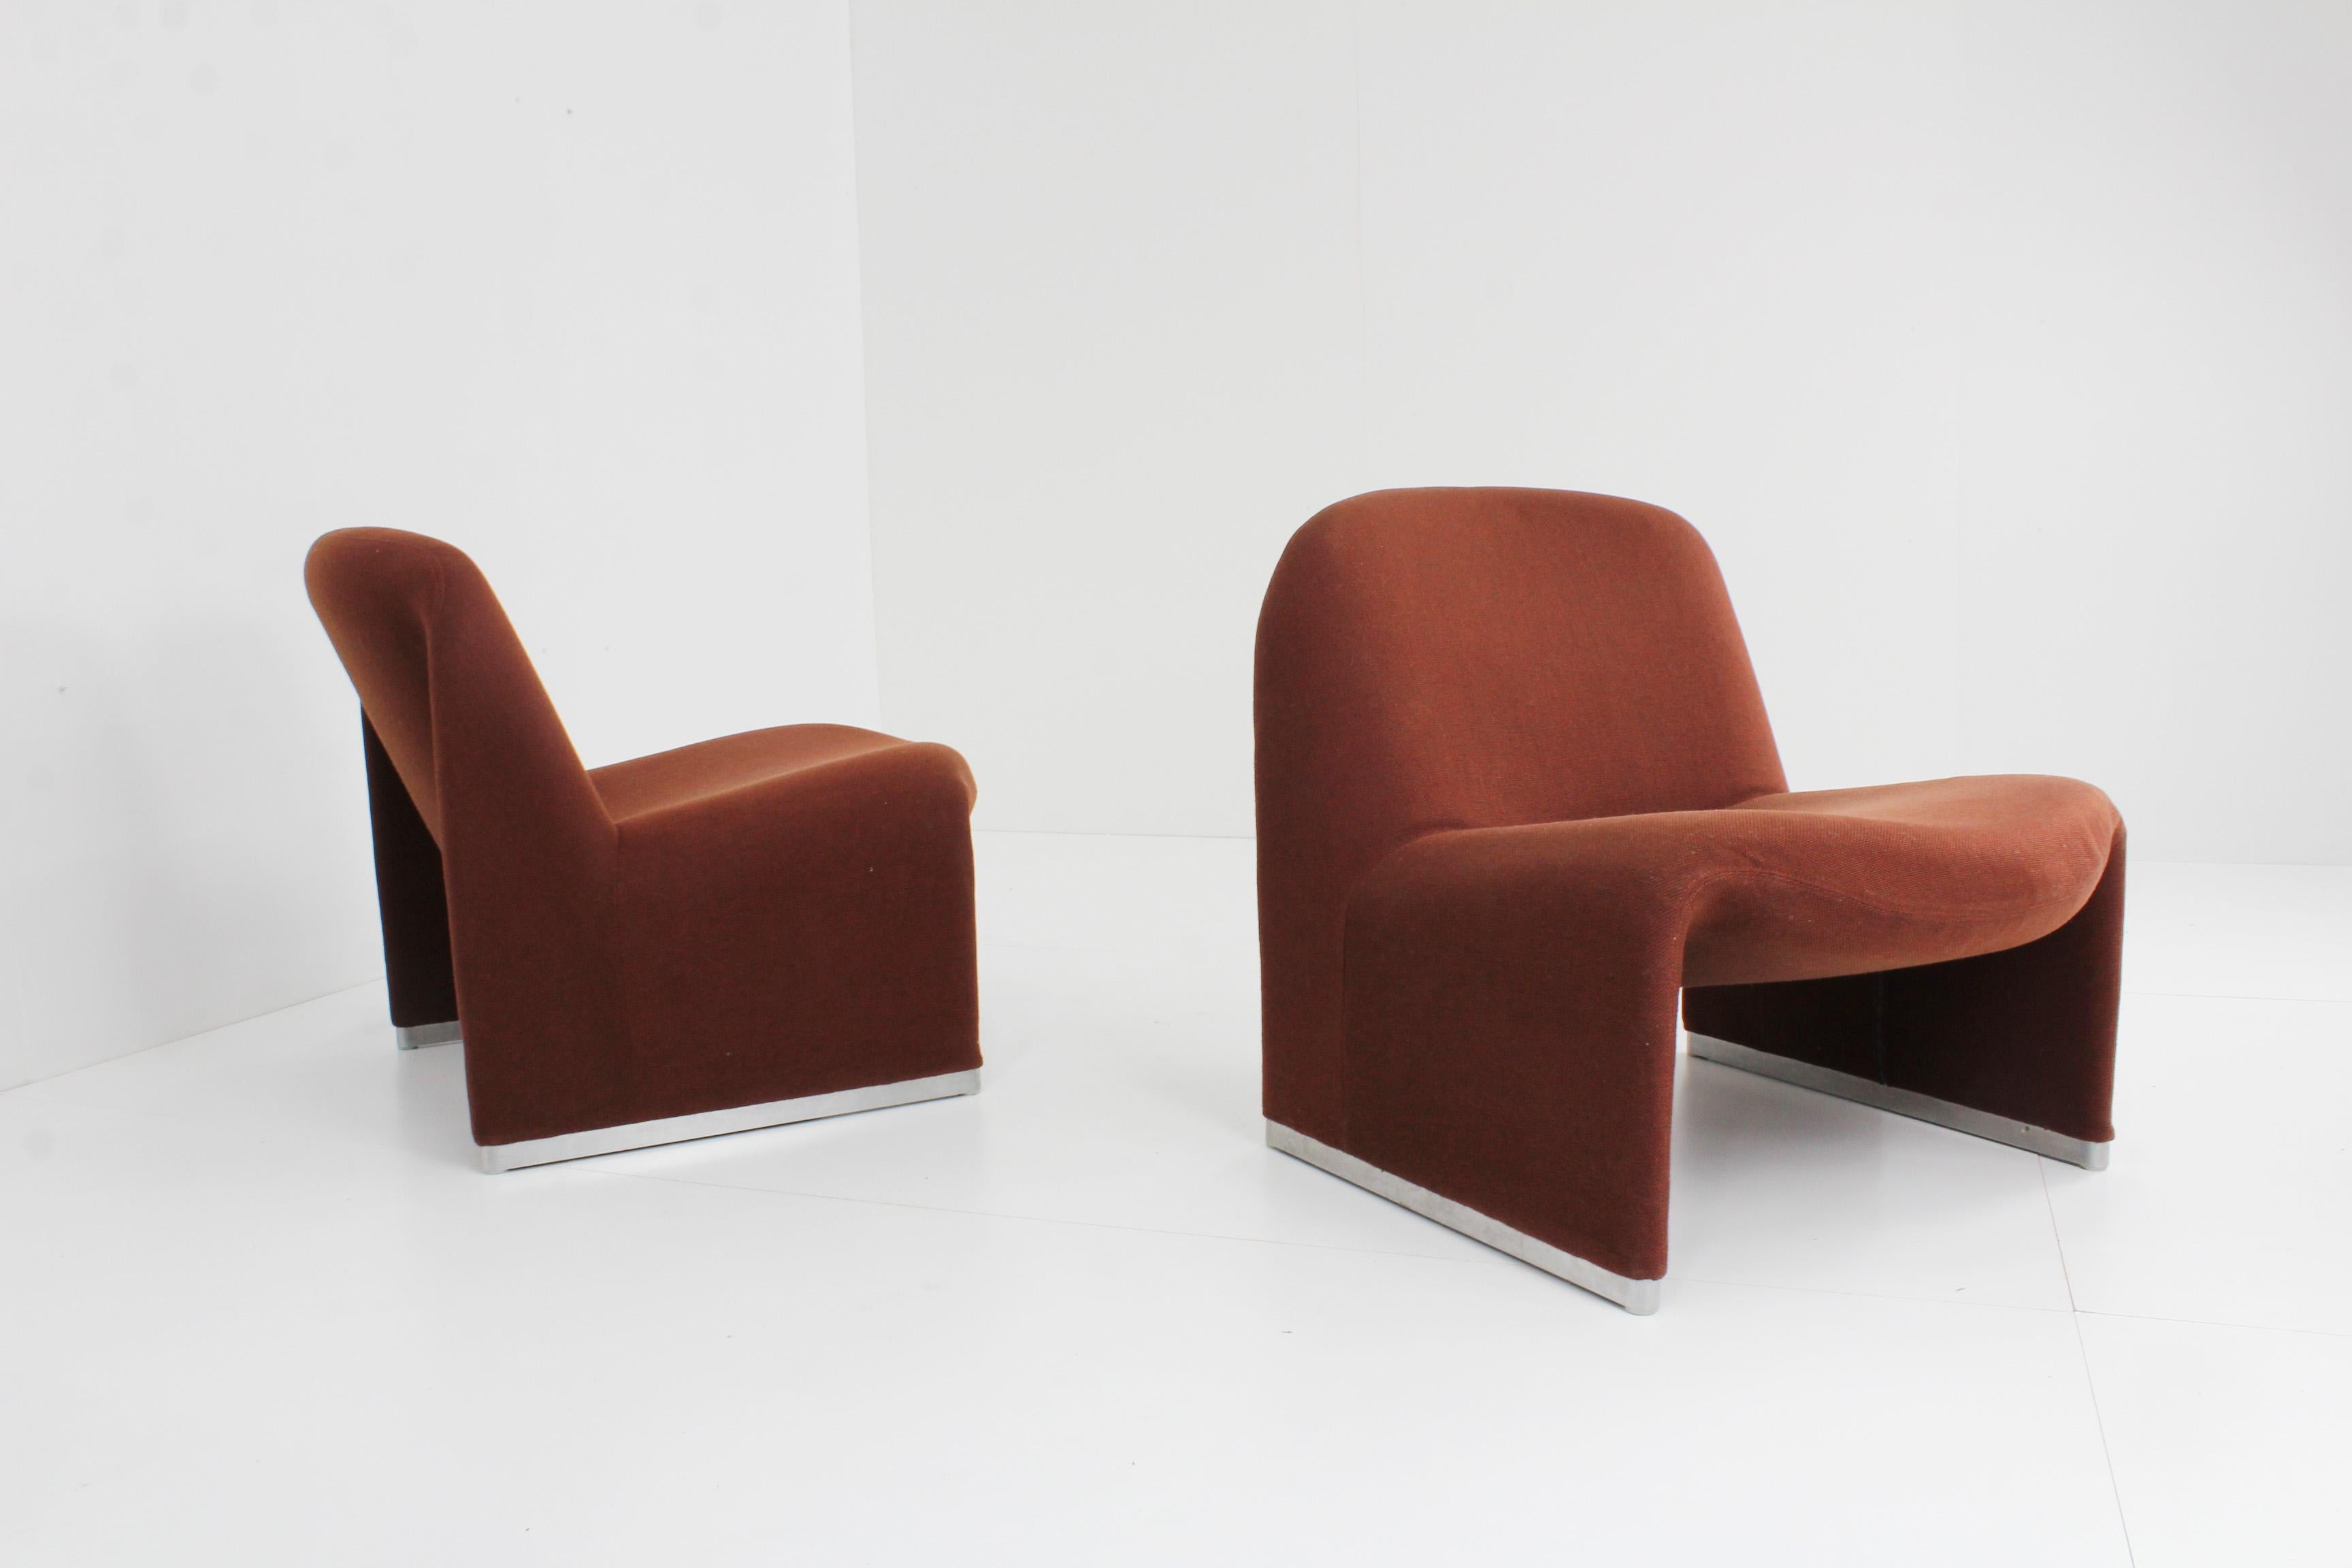 Artifort Alky design armchair designed by Giancarlo Piretti in a beautiful warm colour. 
2 Identical alkys available, price is per piece, both separately and per set

The chairs are vintage but are in a very good condition.